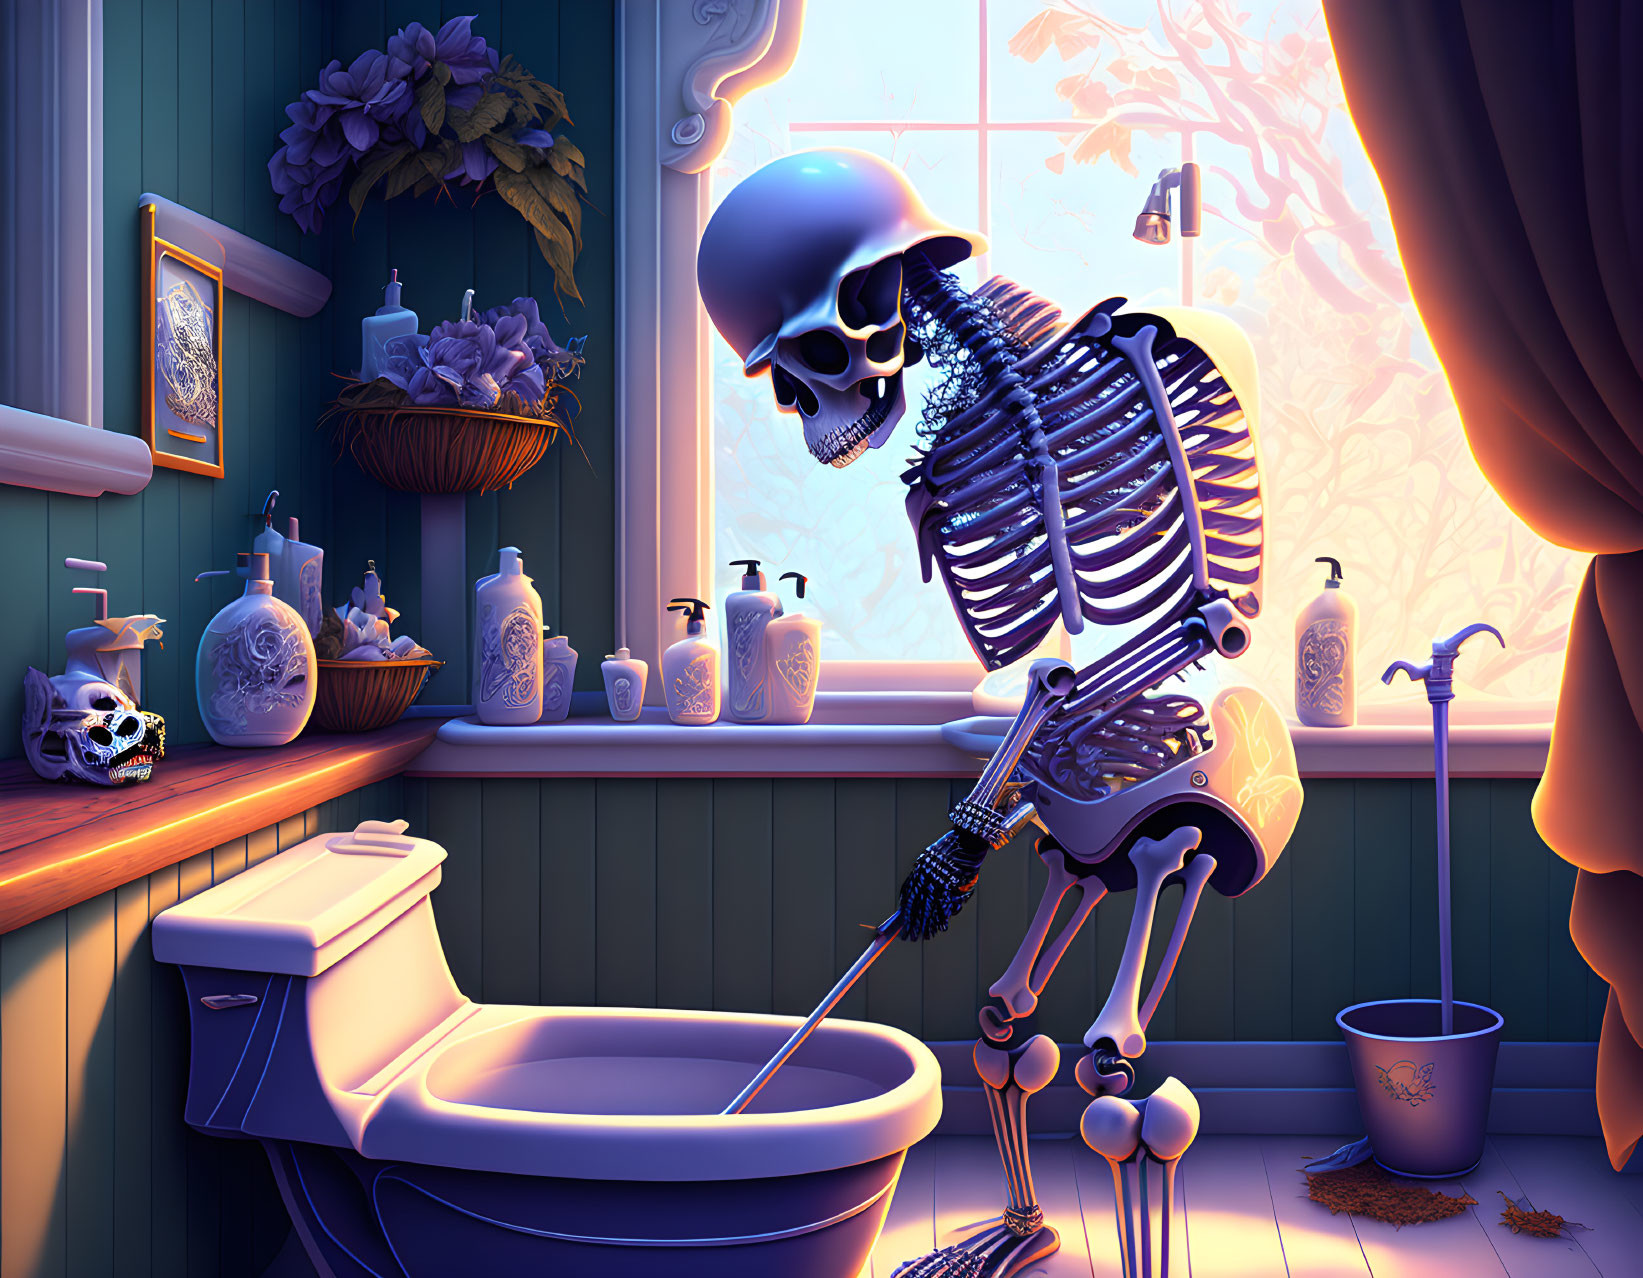 Skeleton cleaning toilet in blue bathroom with window, plants, and toiletries